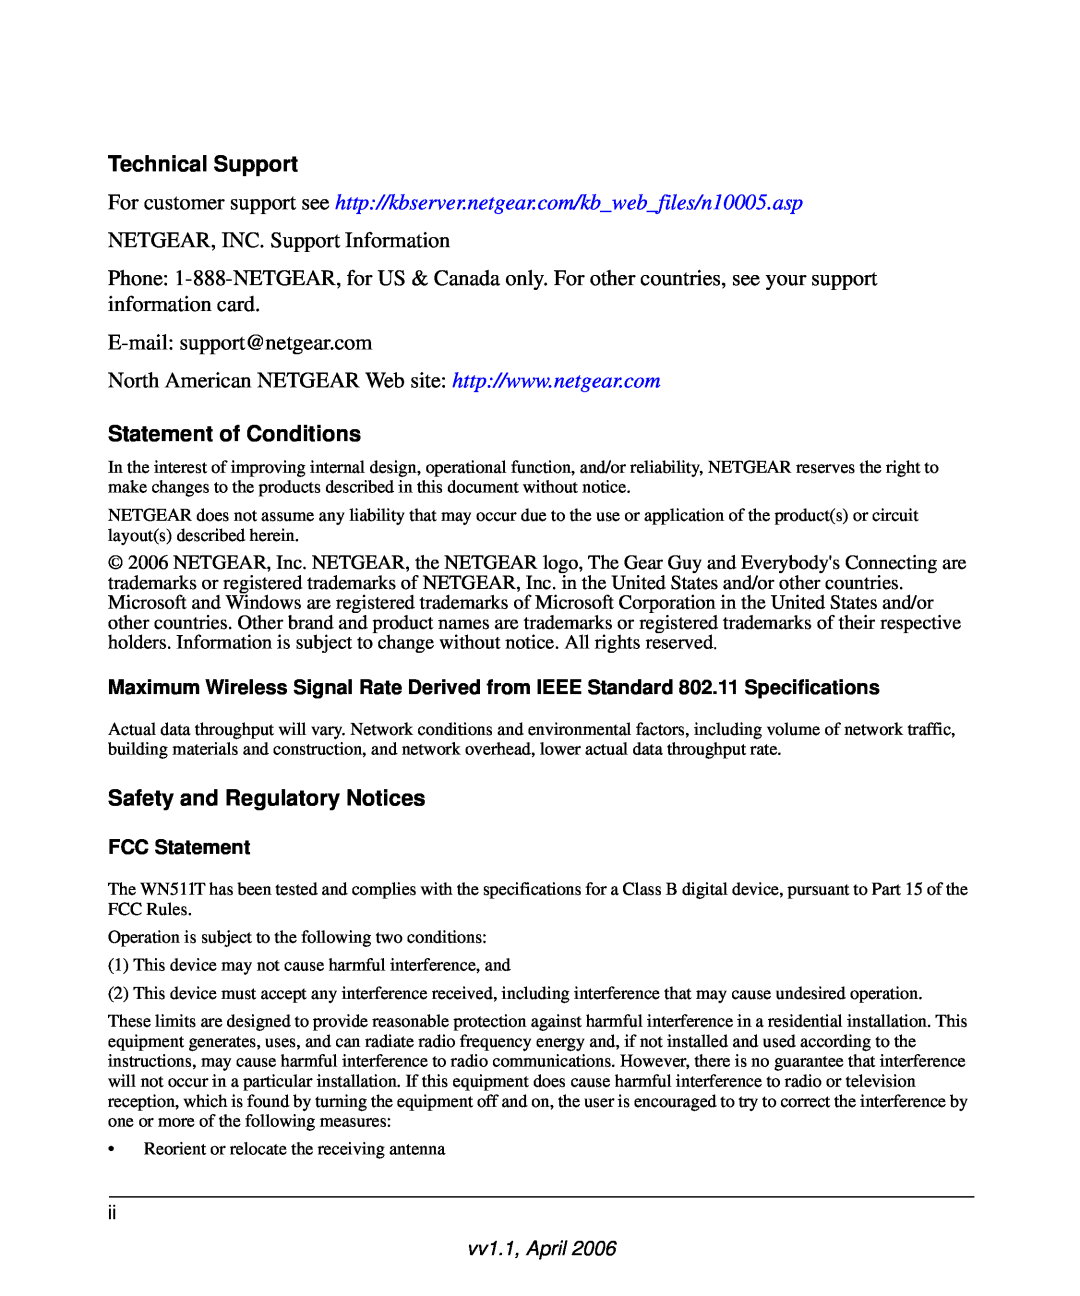 NETGEAR WN511T Technical Support, Statement of Conditions, Safety and Regulatory Notices, FCC Statement, vv1.1, April 